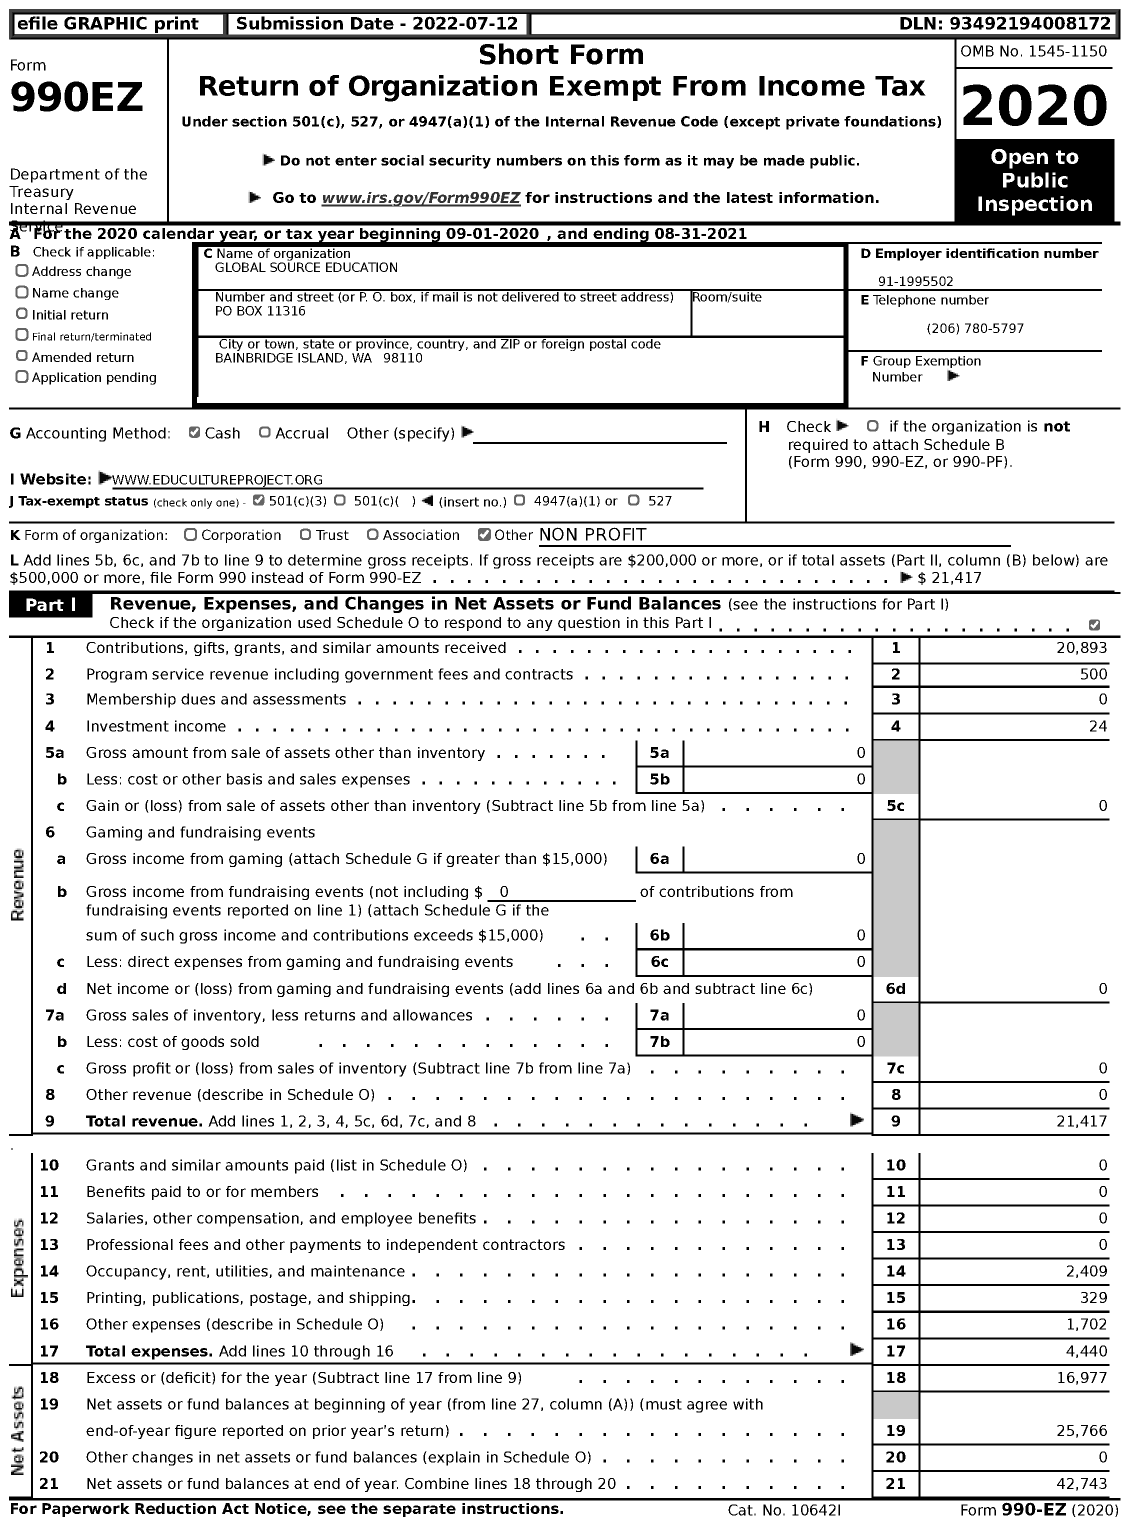 Image of first page of 2020 Form 990EZ for Global Source Education